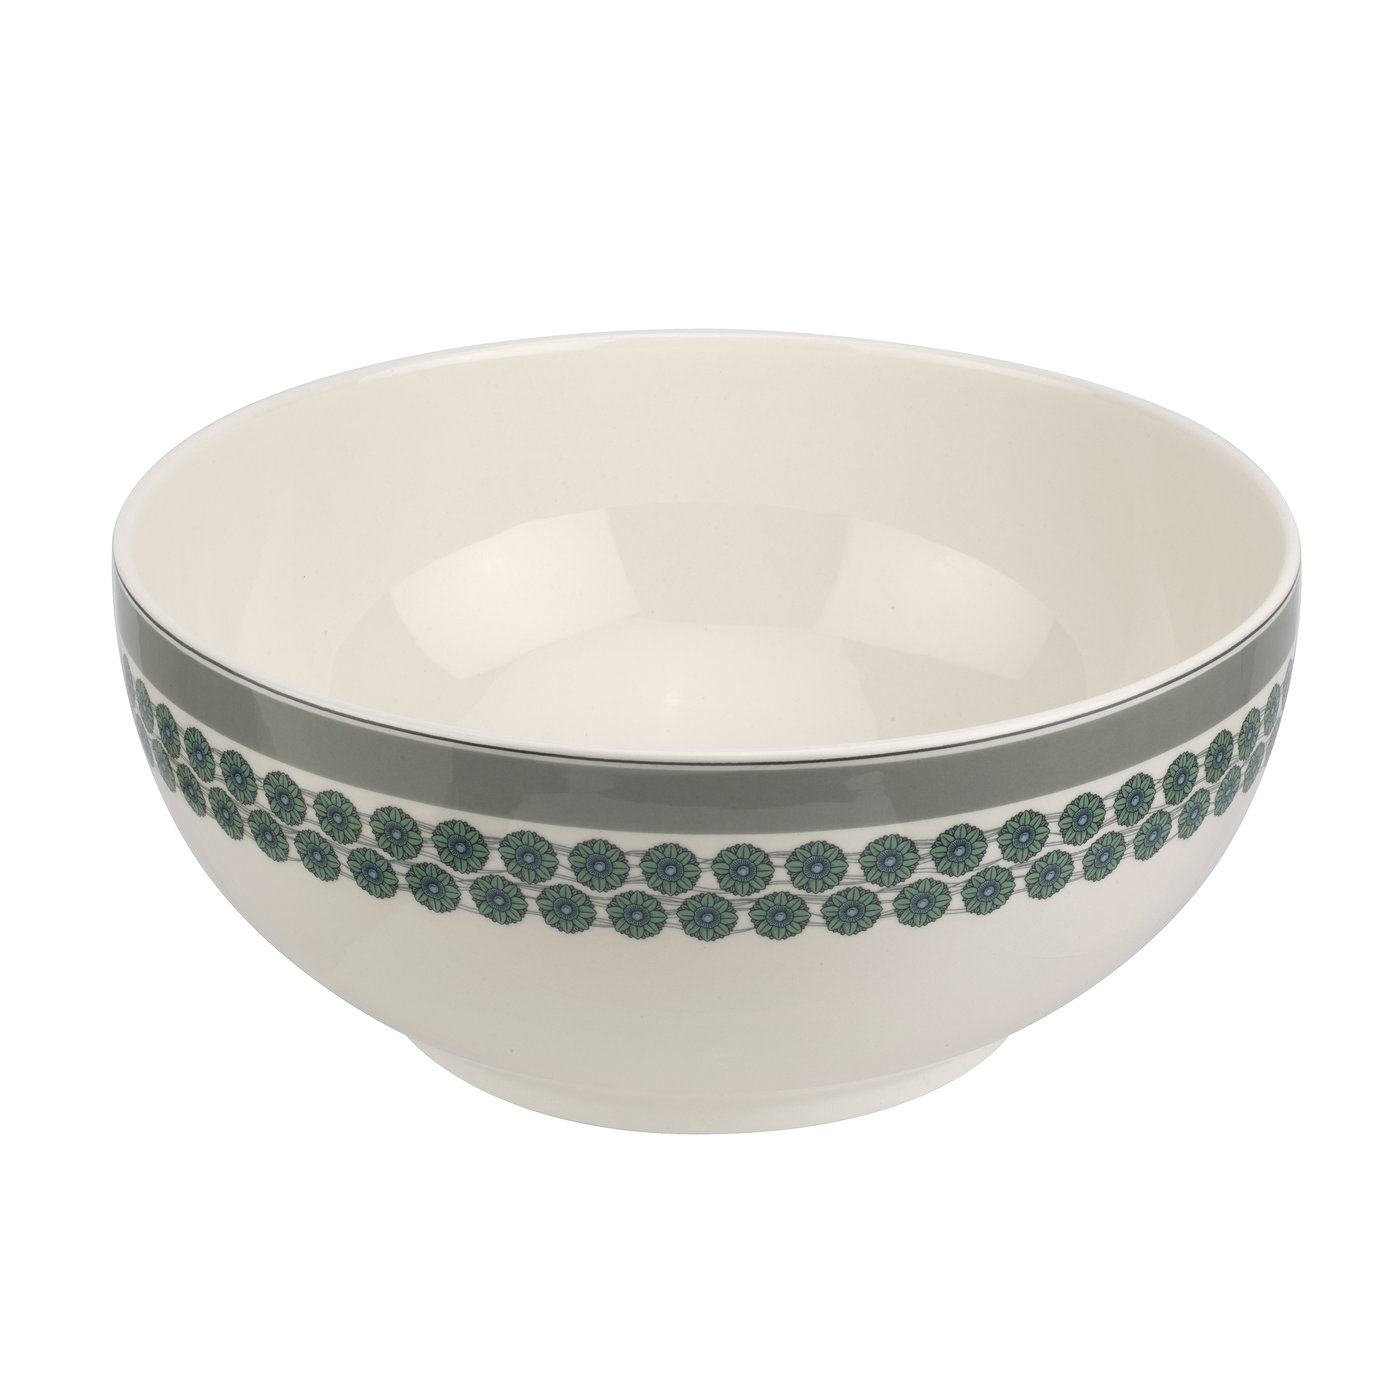 Westerly Grey 11 Inch Deep Bowl image number null